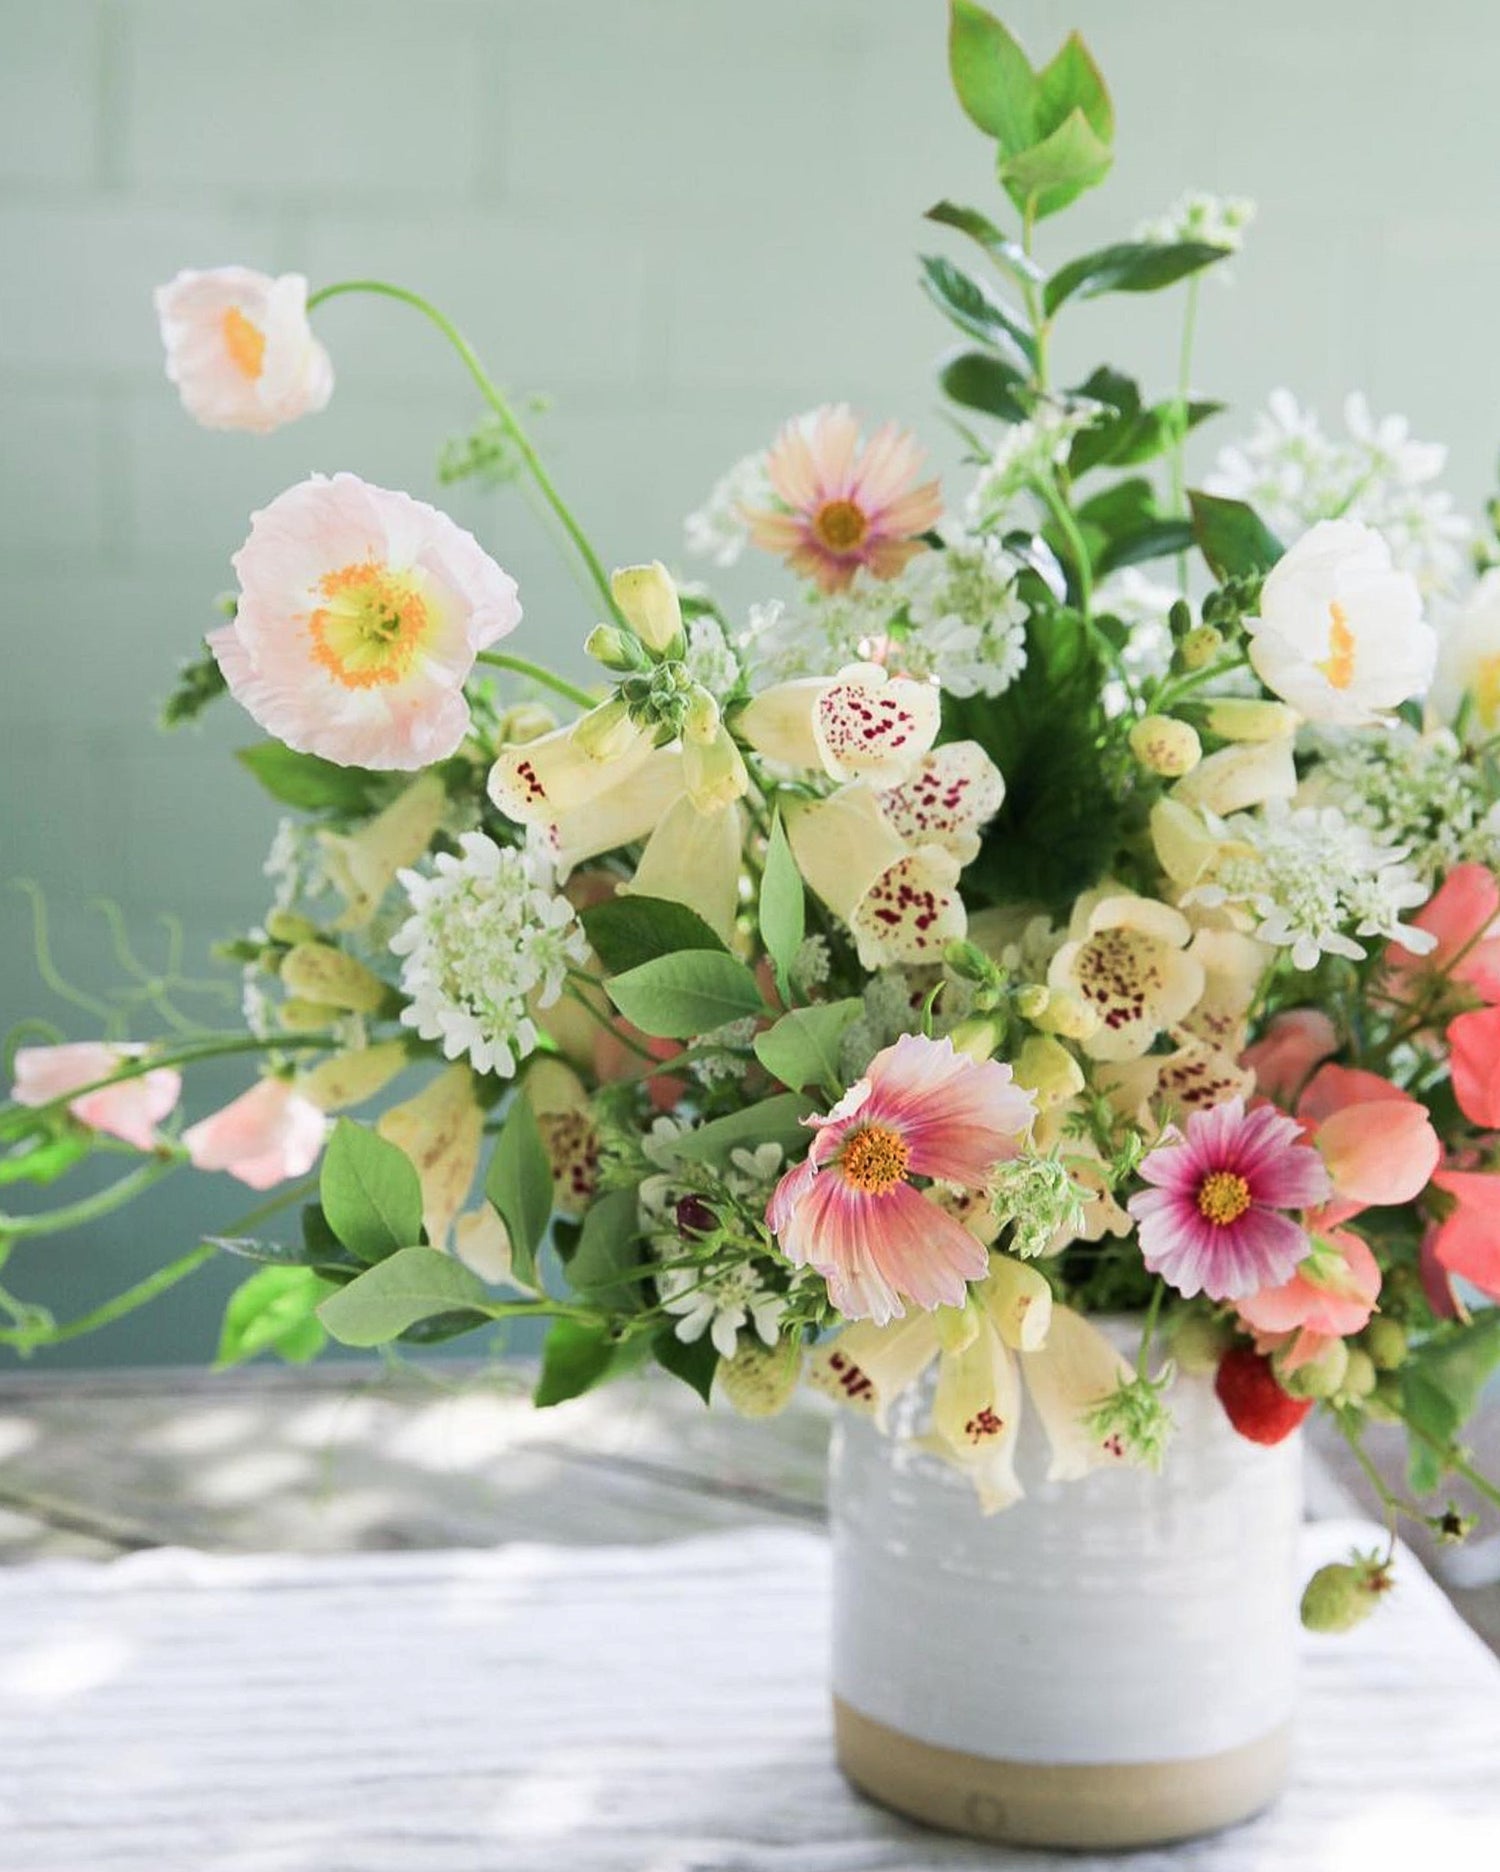 Pink and yellow spring flower arrangement made with foxglove, cosmos and poppies in a handmade ceramic vase